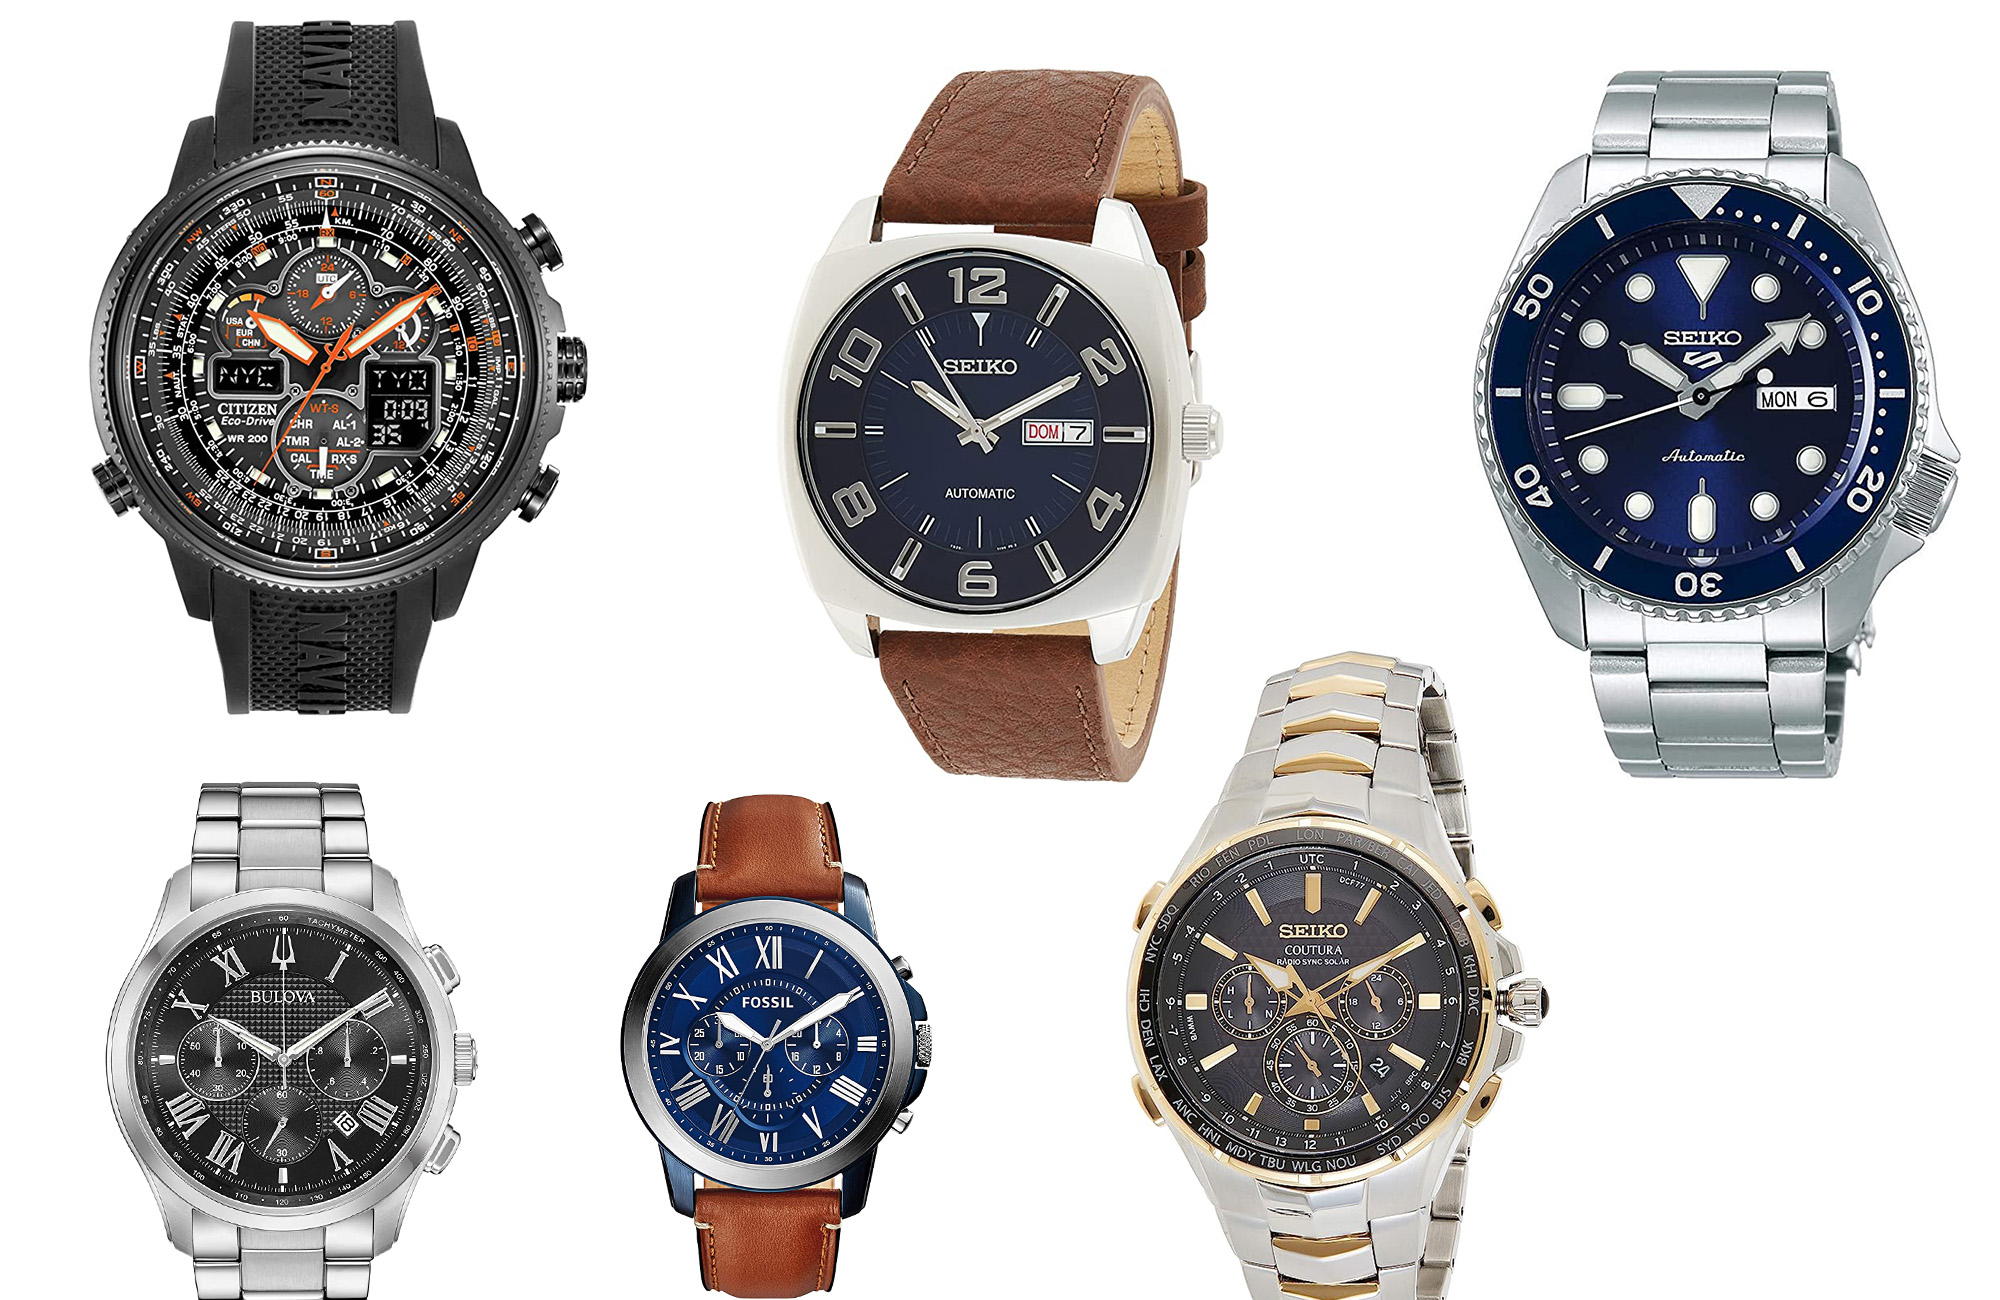 Don’t miss these last-minute deals on the best men’s watches from Seiko, Bulova, Fossil, and Citizen this Prime Day